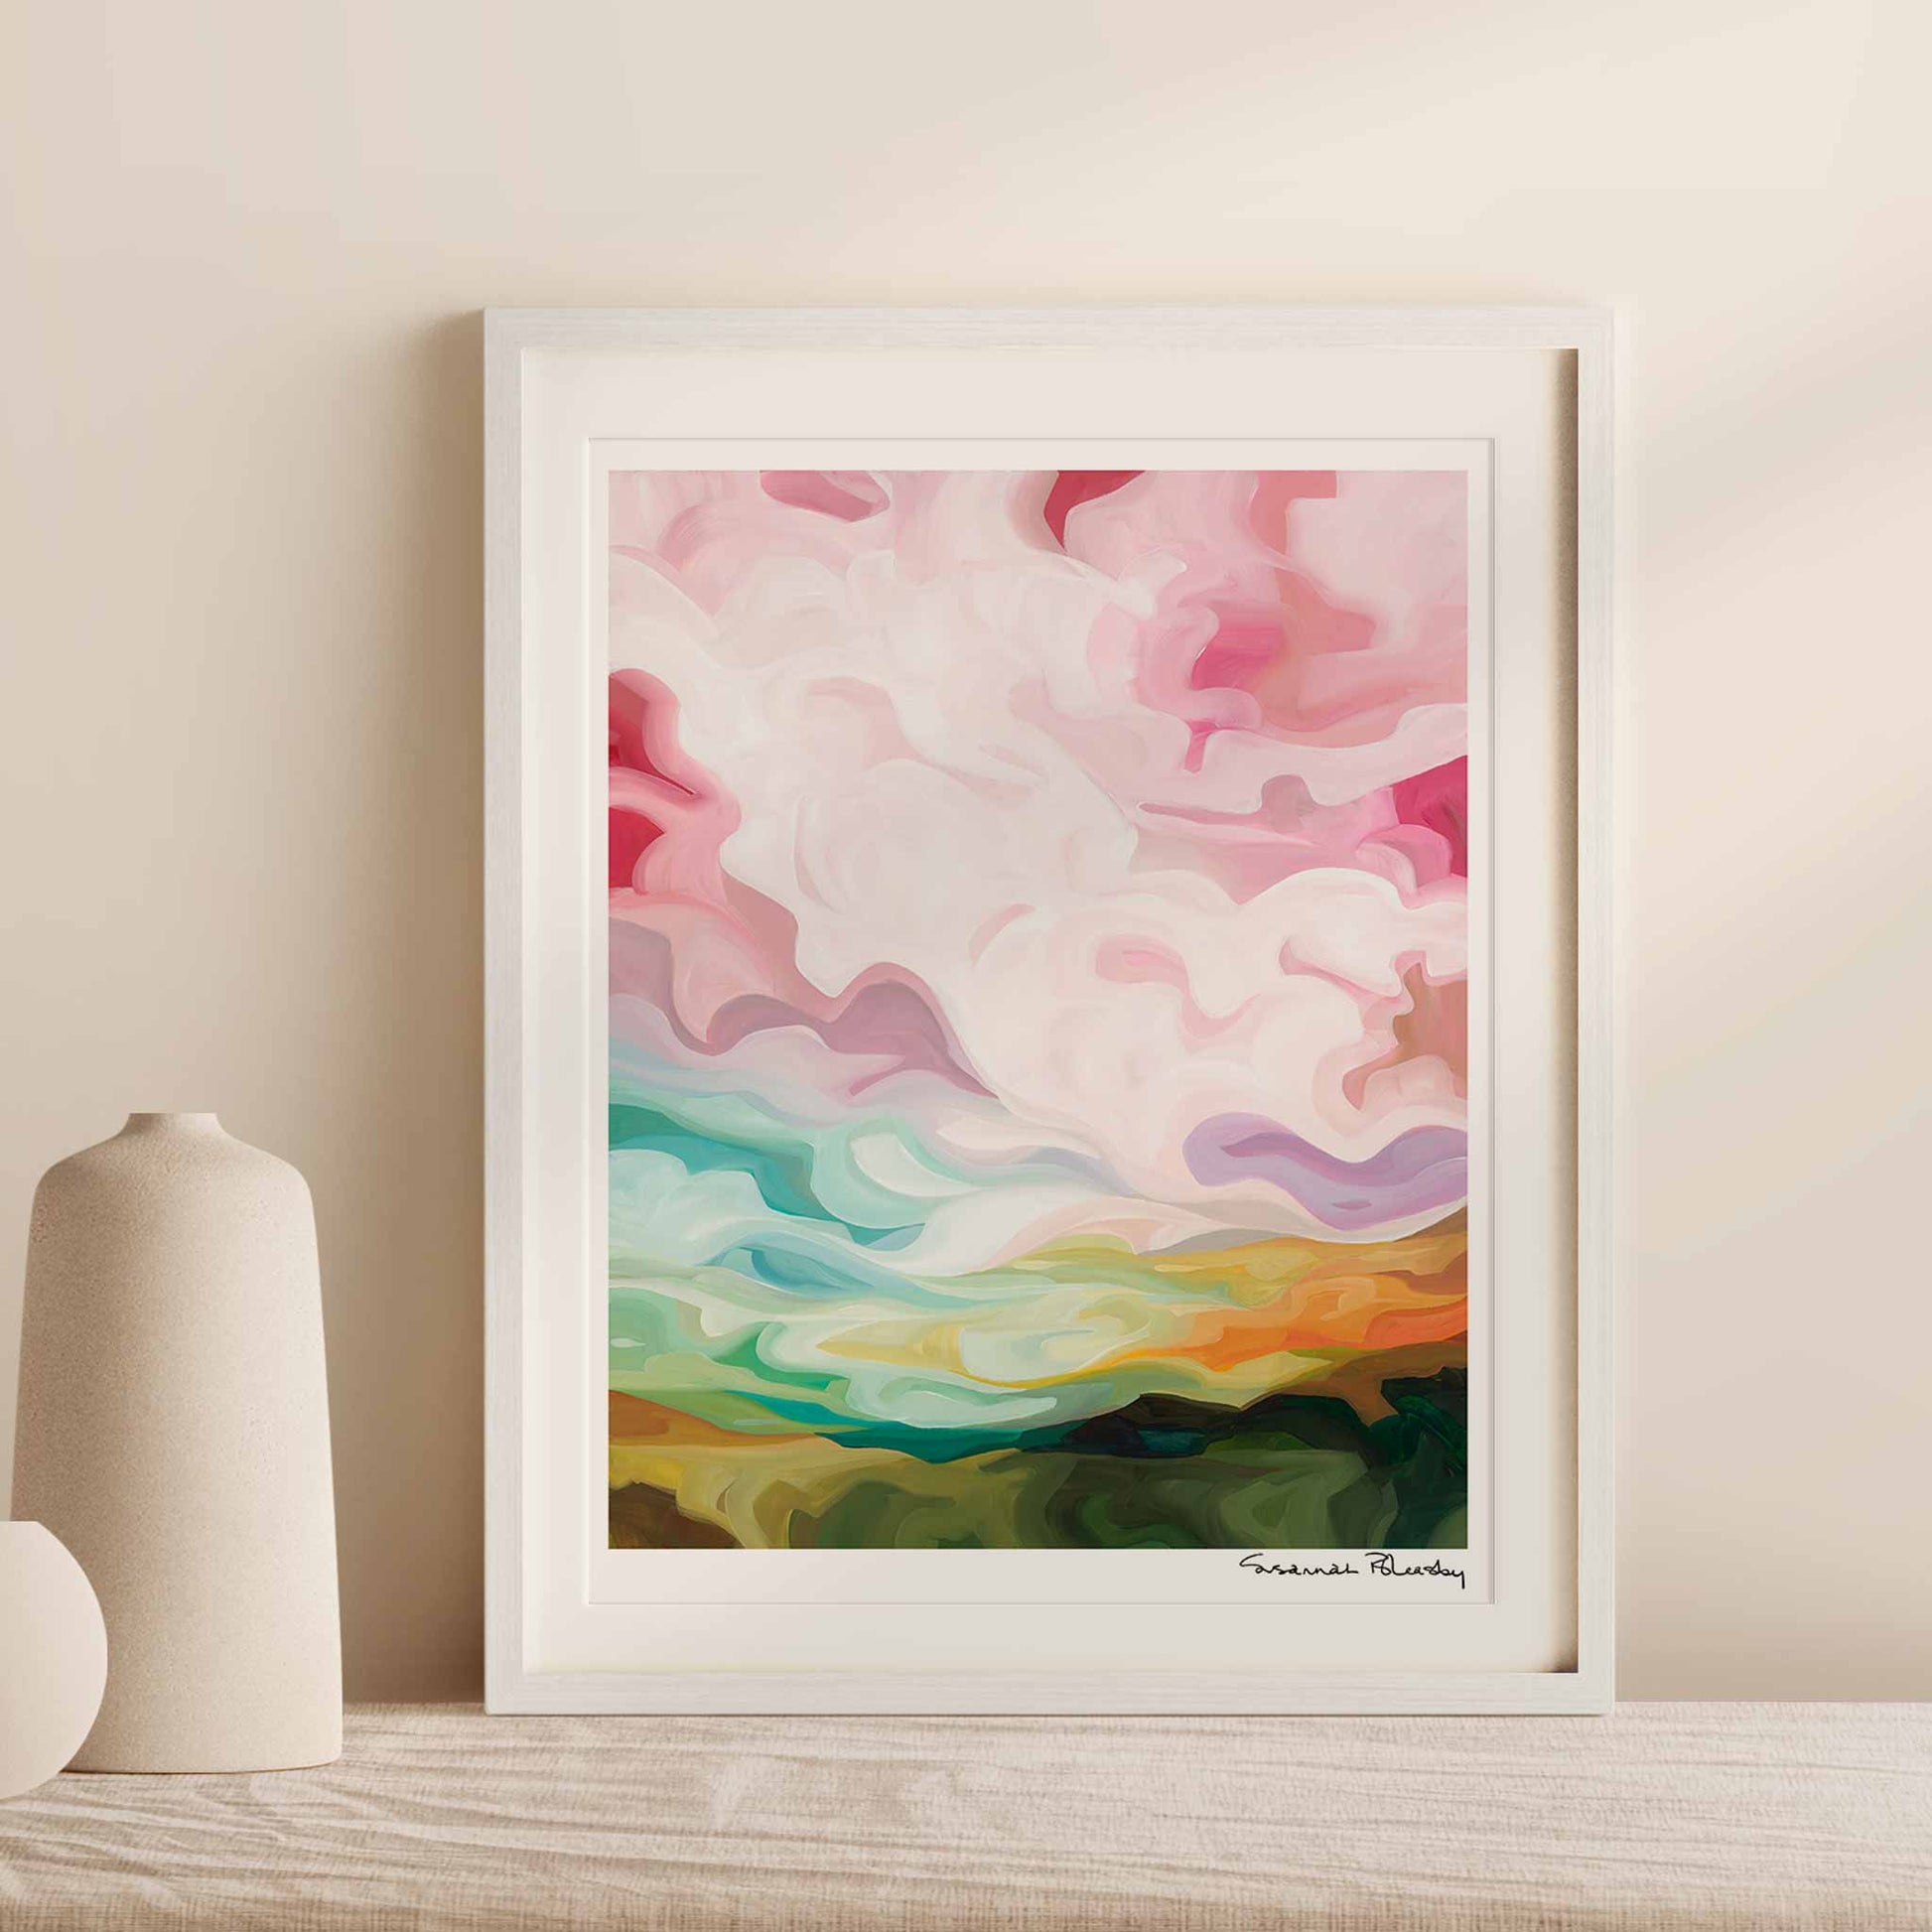 Vertical art print of a pastel sunrise painting by Canadian abstract artist Susannah Bleasby